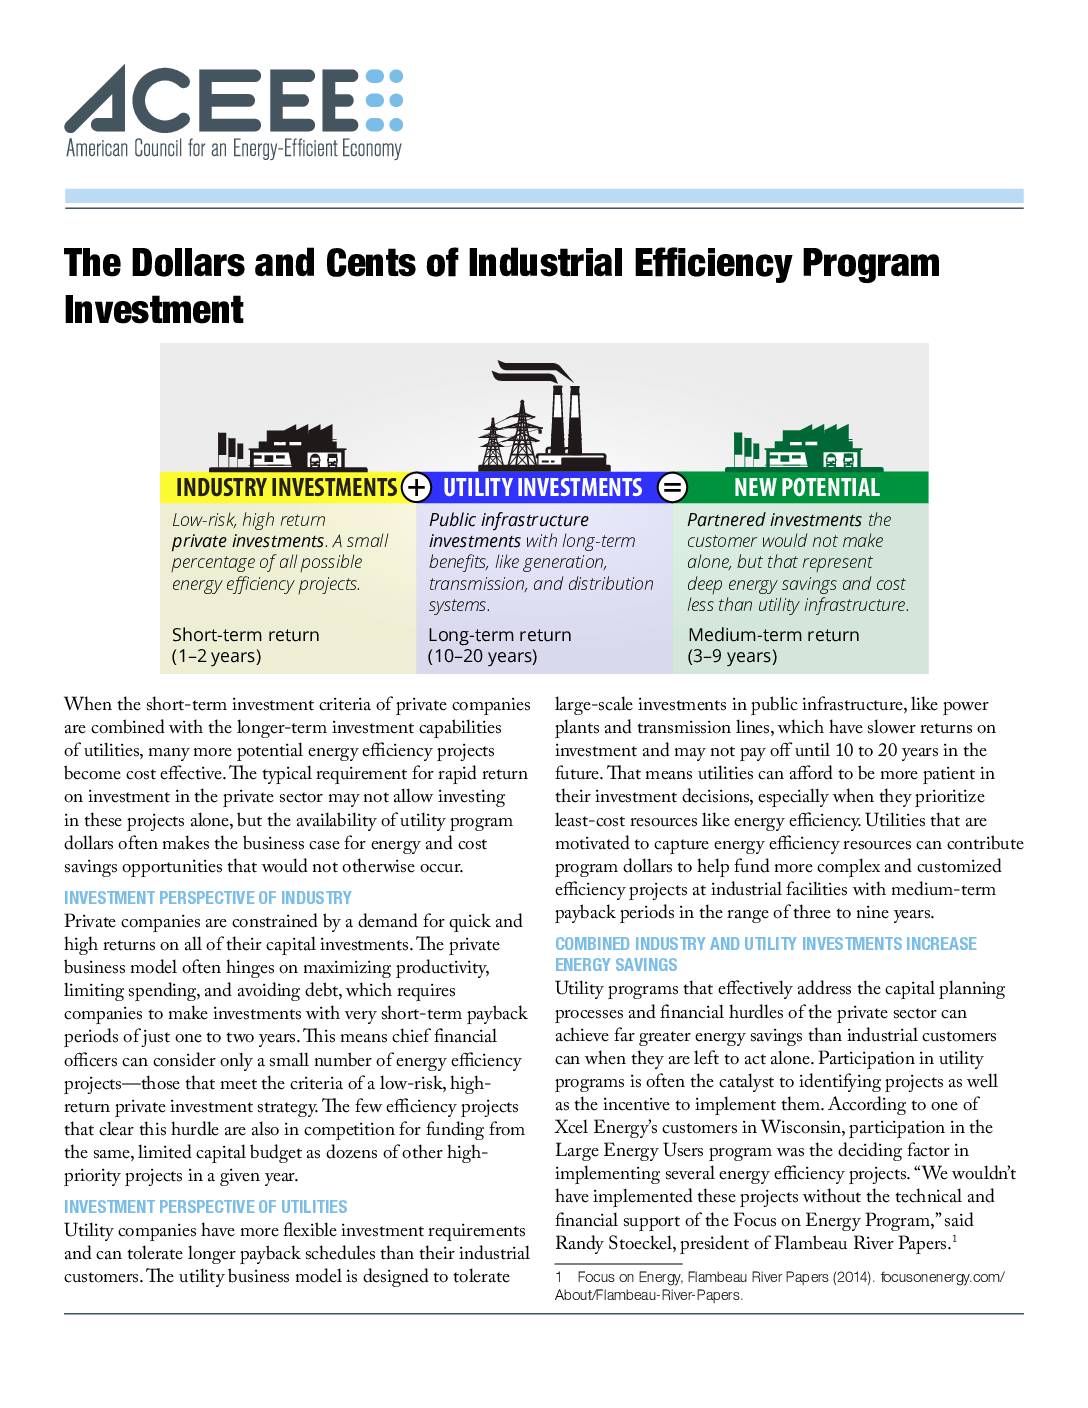 The Dollars and Cents of Industrial Efficiency Program Investment